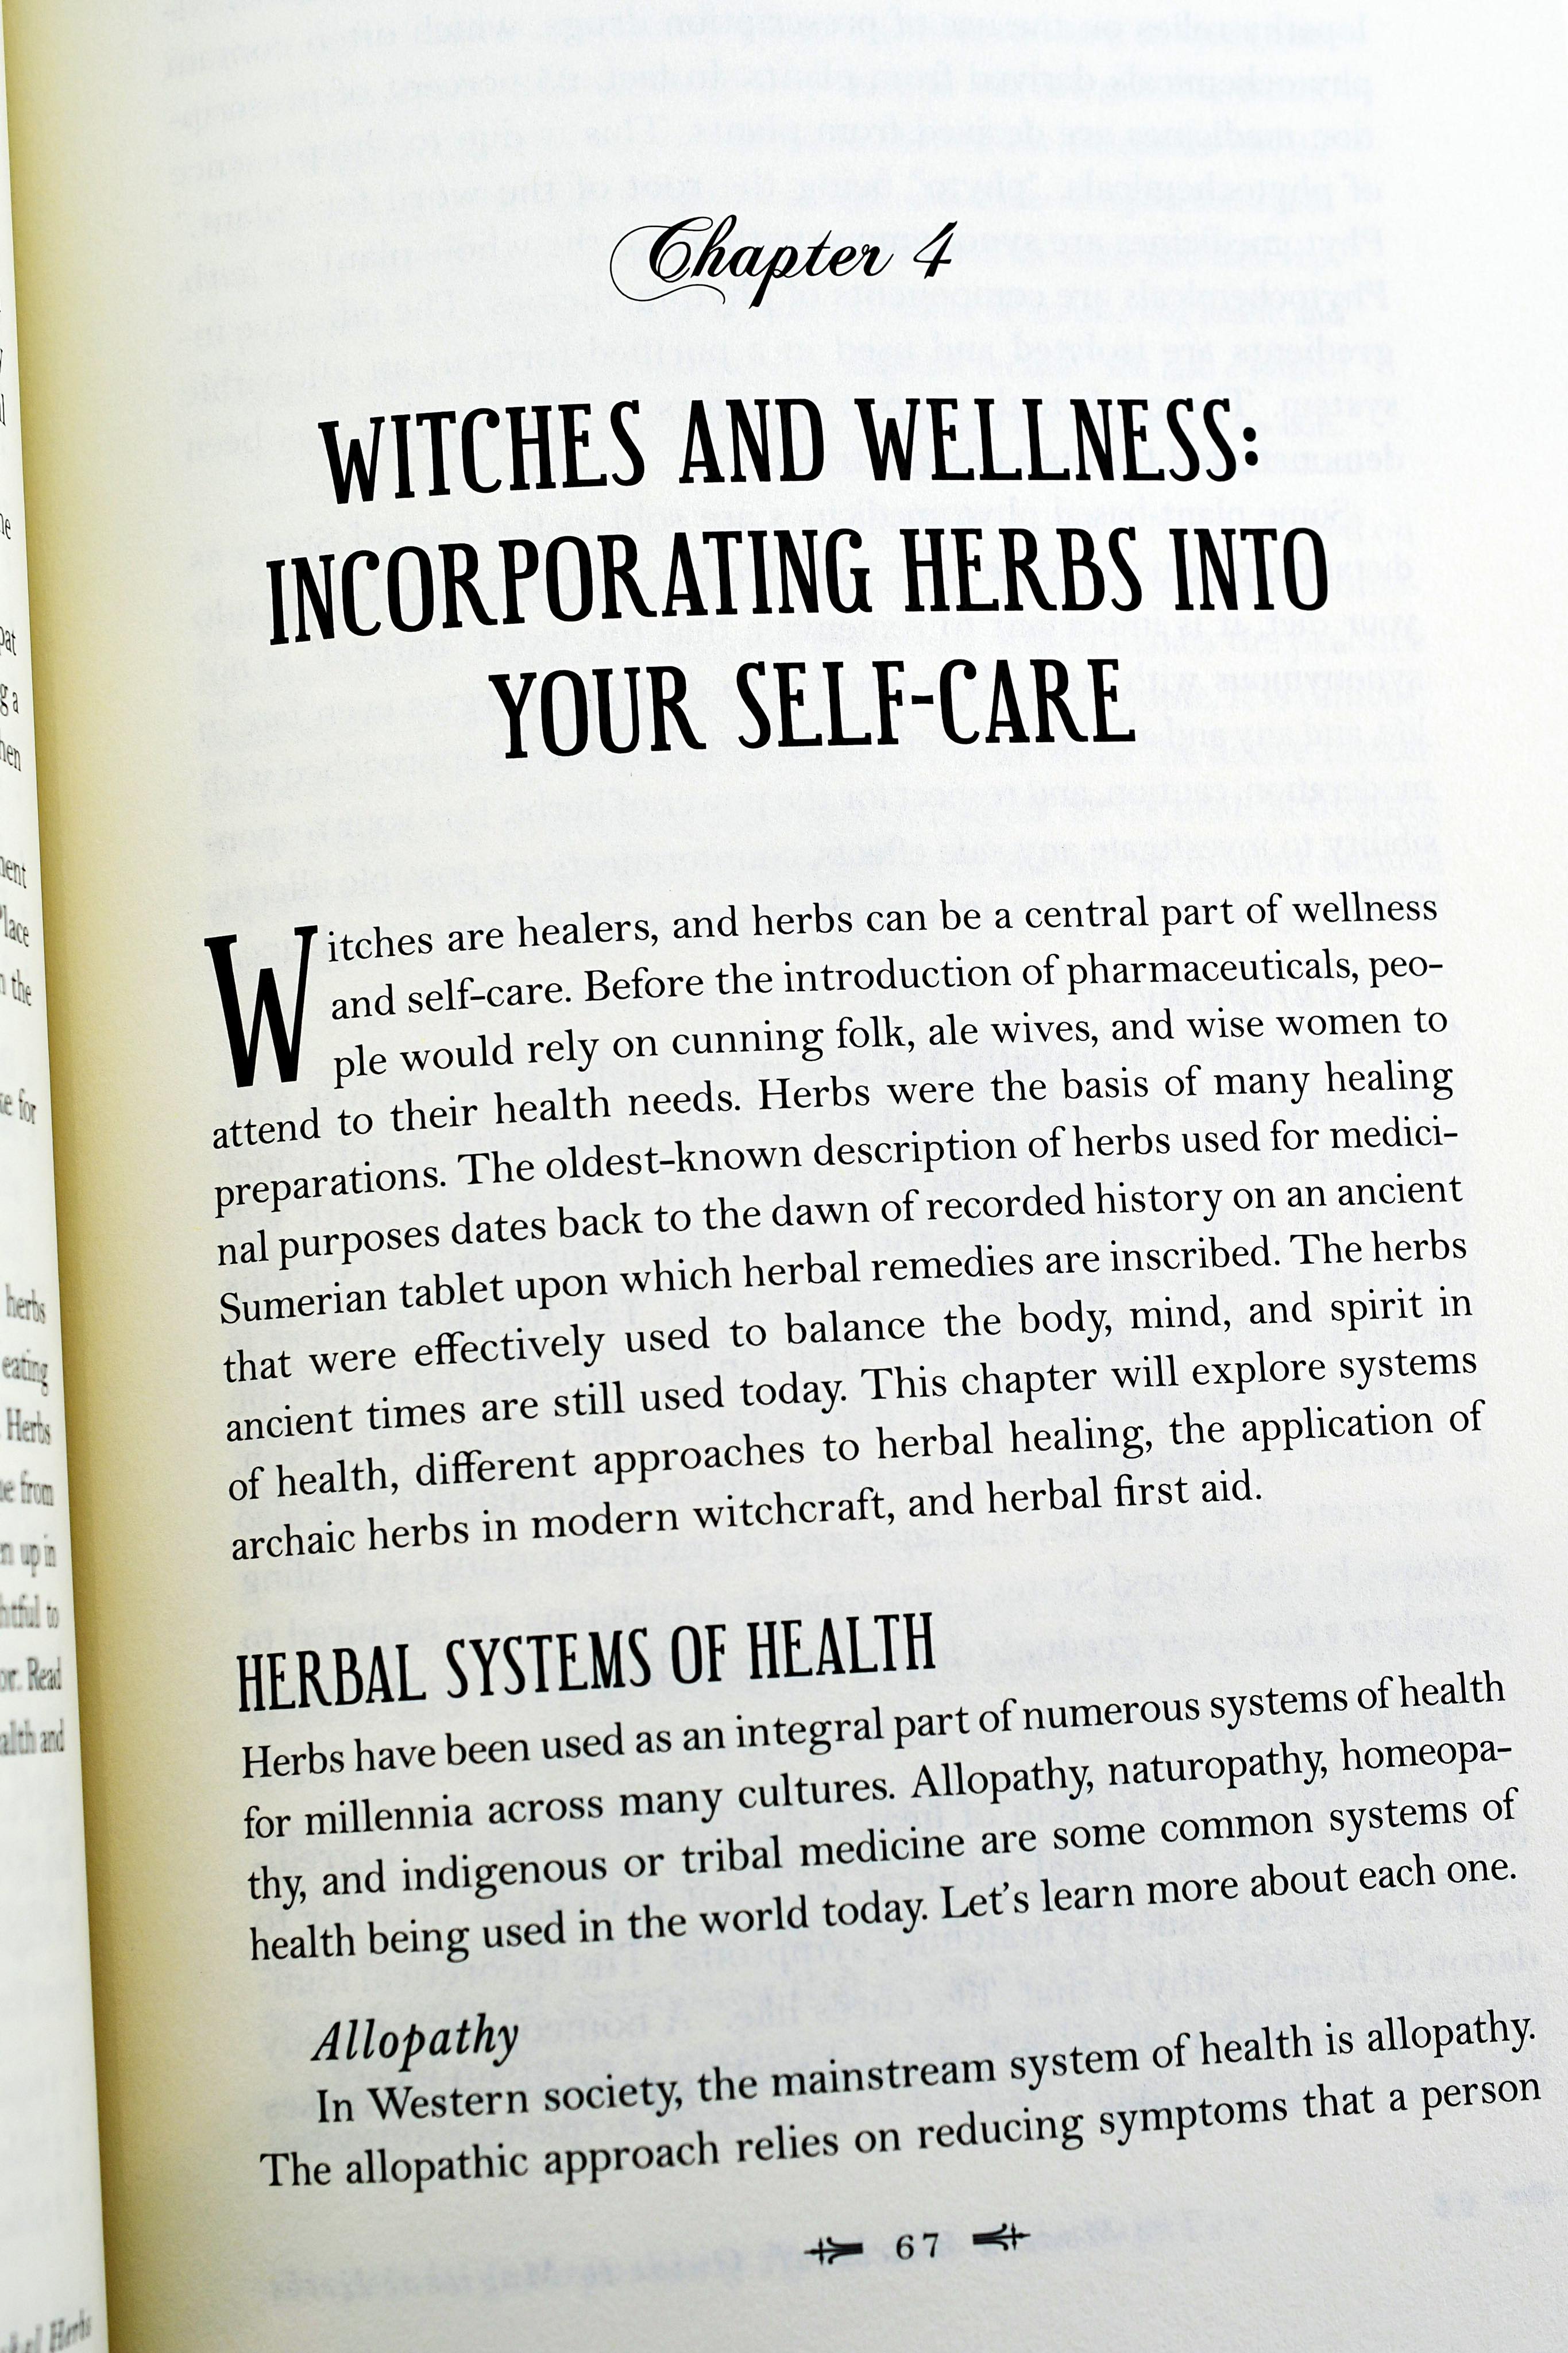 The Modern Witchcraft Guide to Magickal Herbs